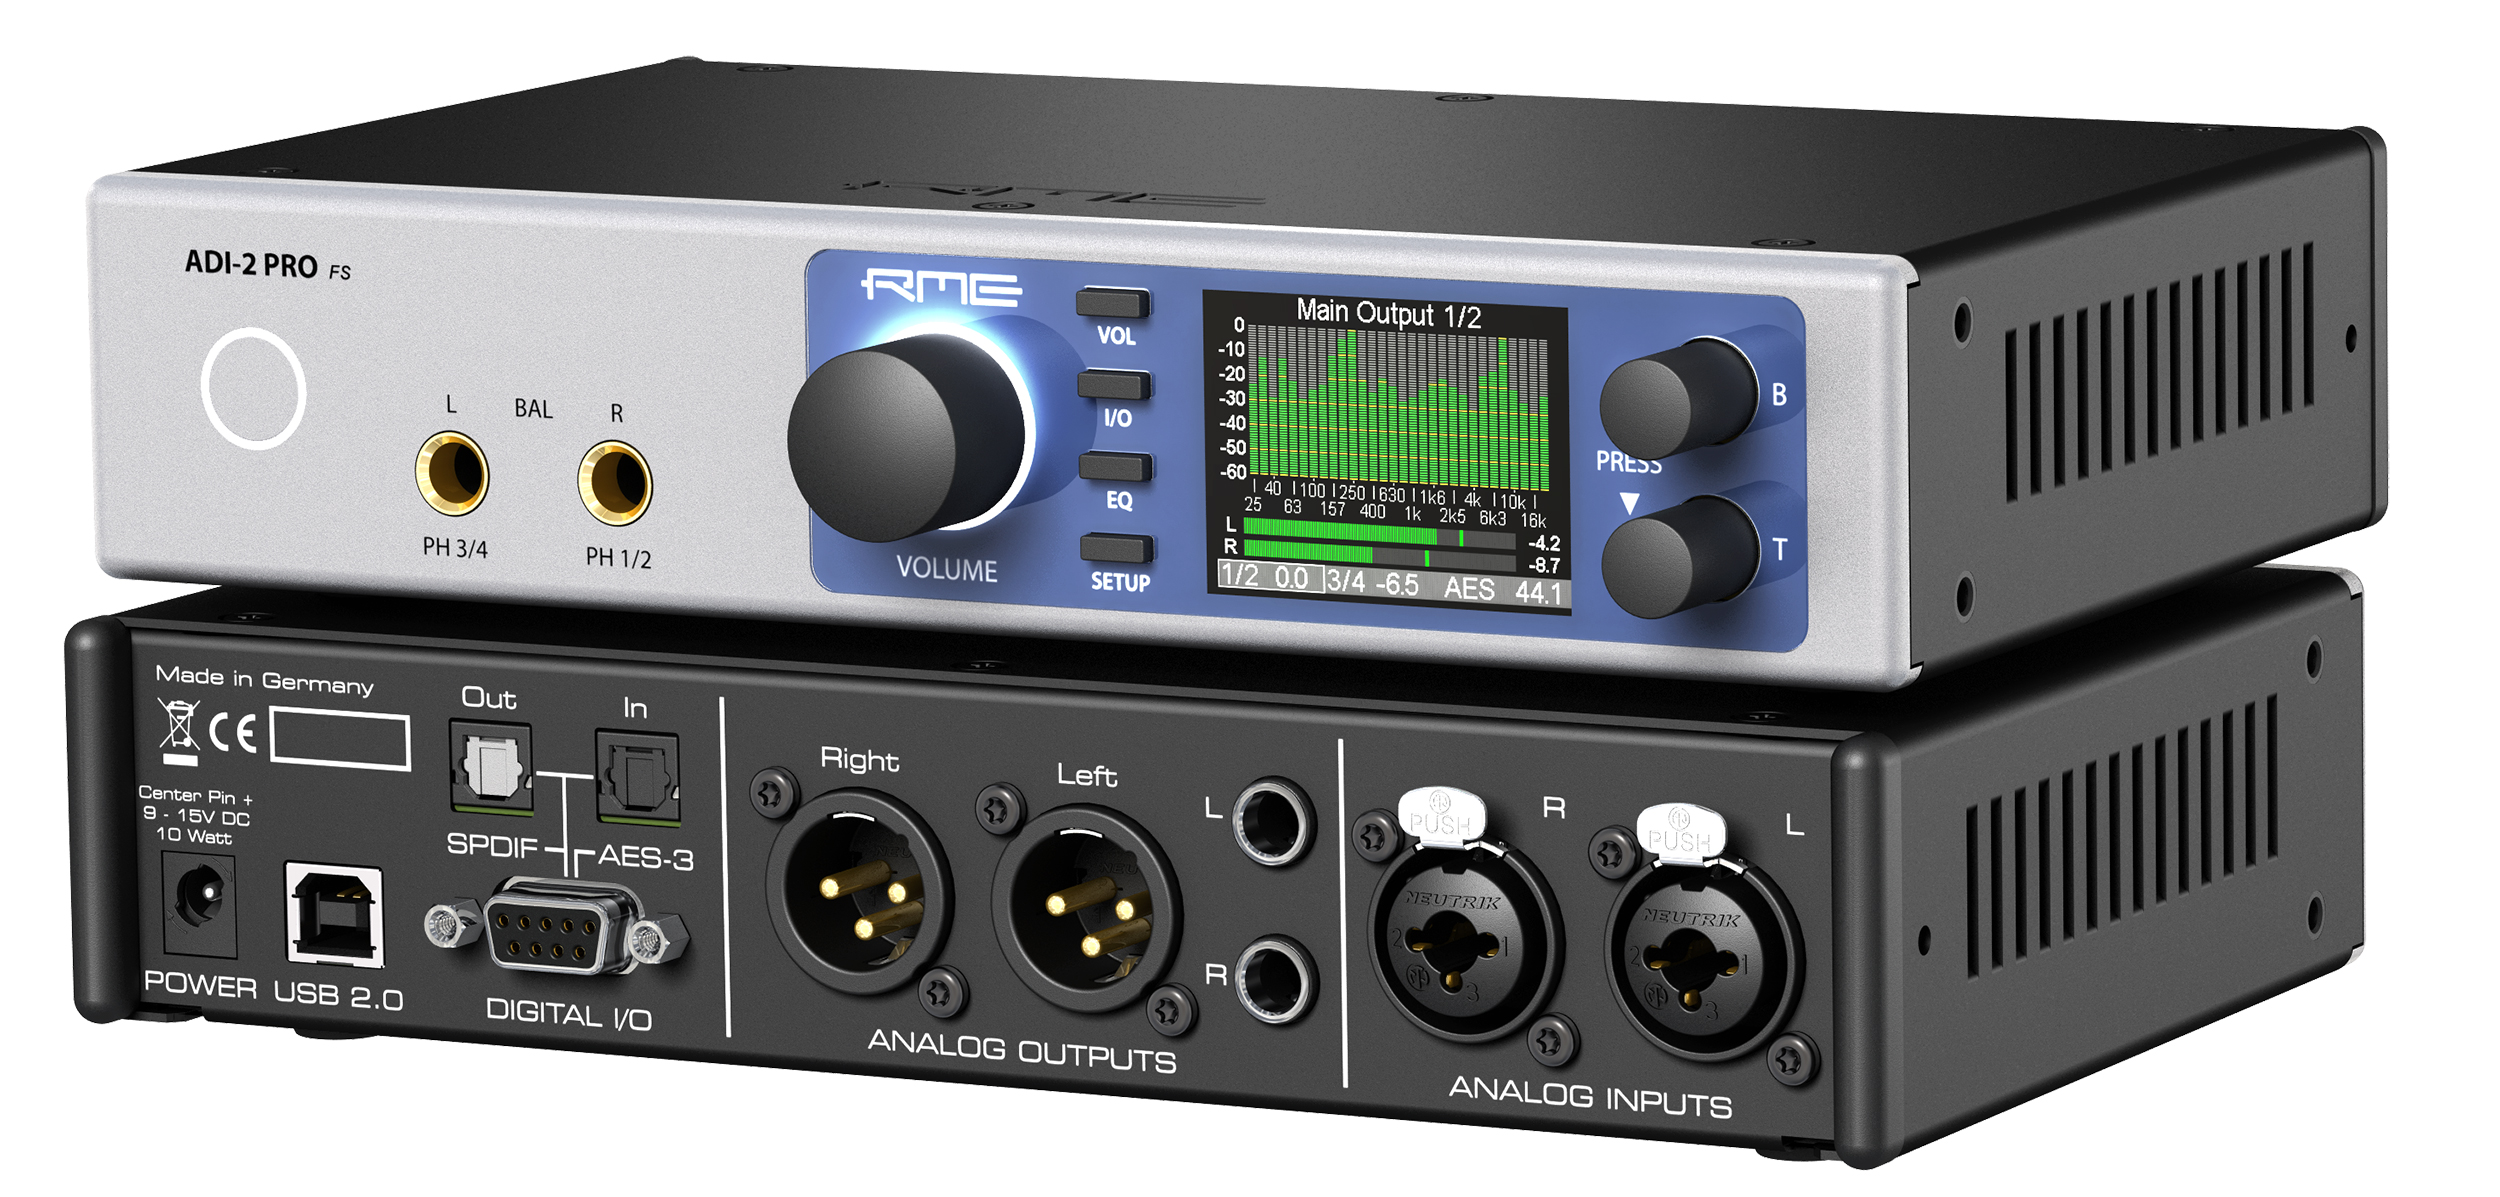 http://www.rme-audio.de/images/products/products_adi-2_pro_1b.jpg